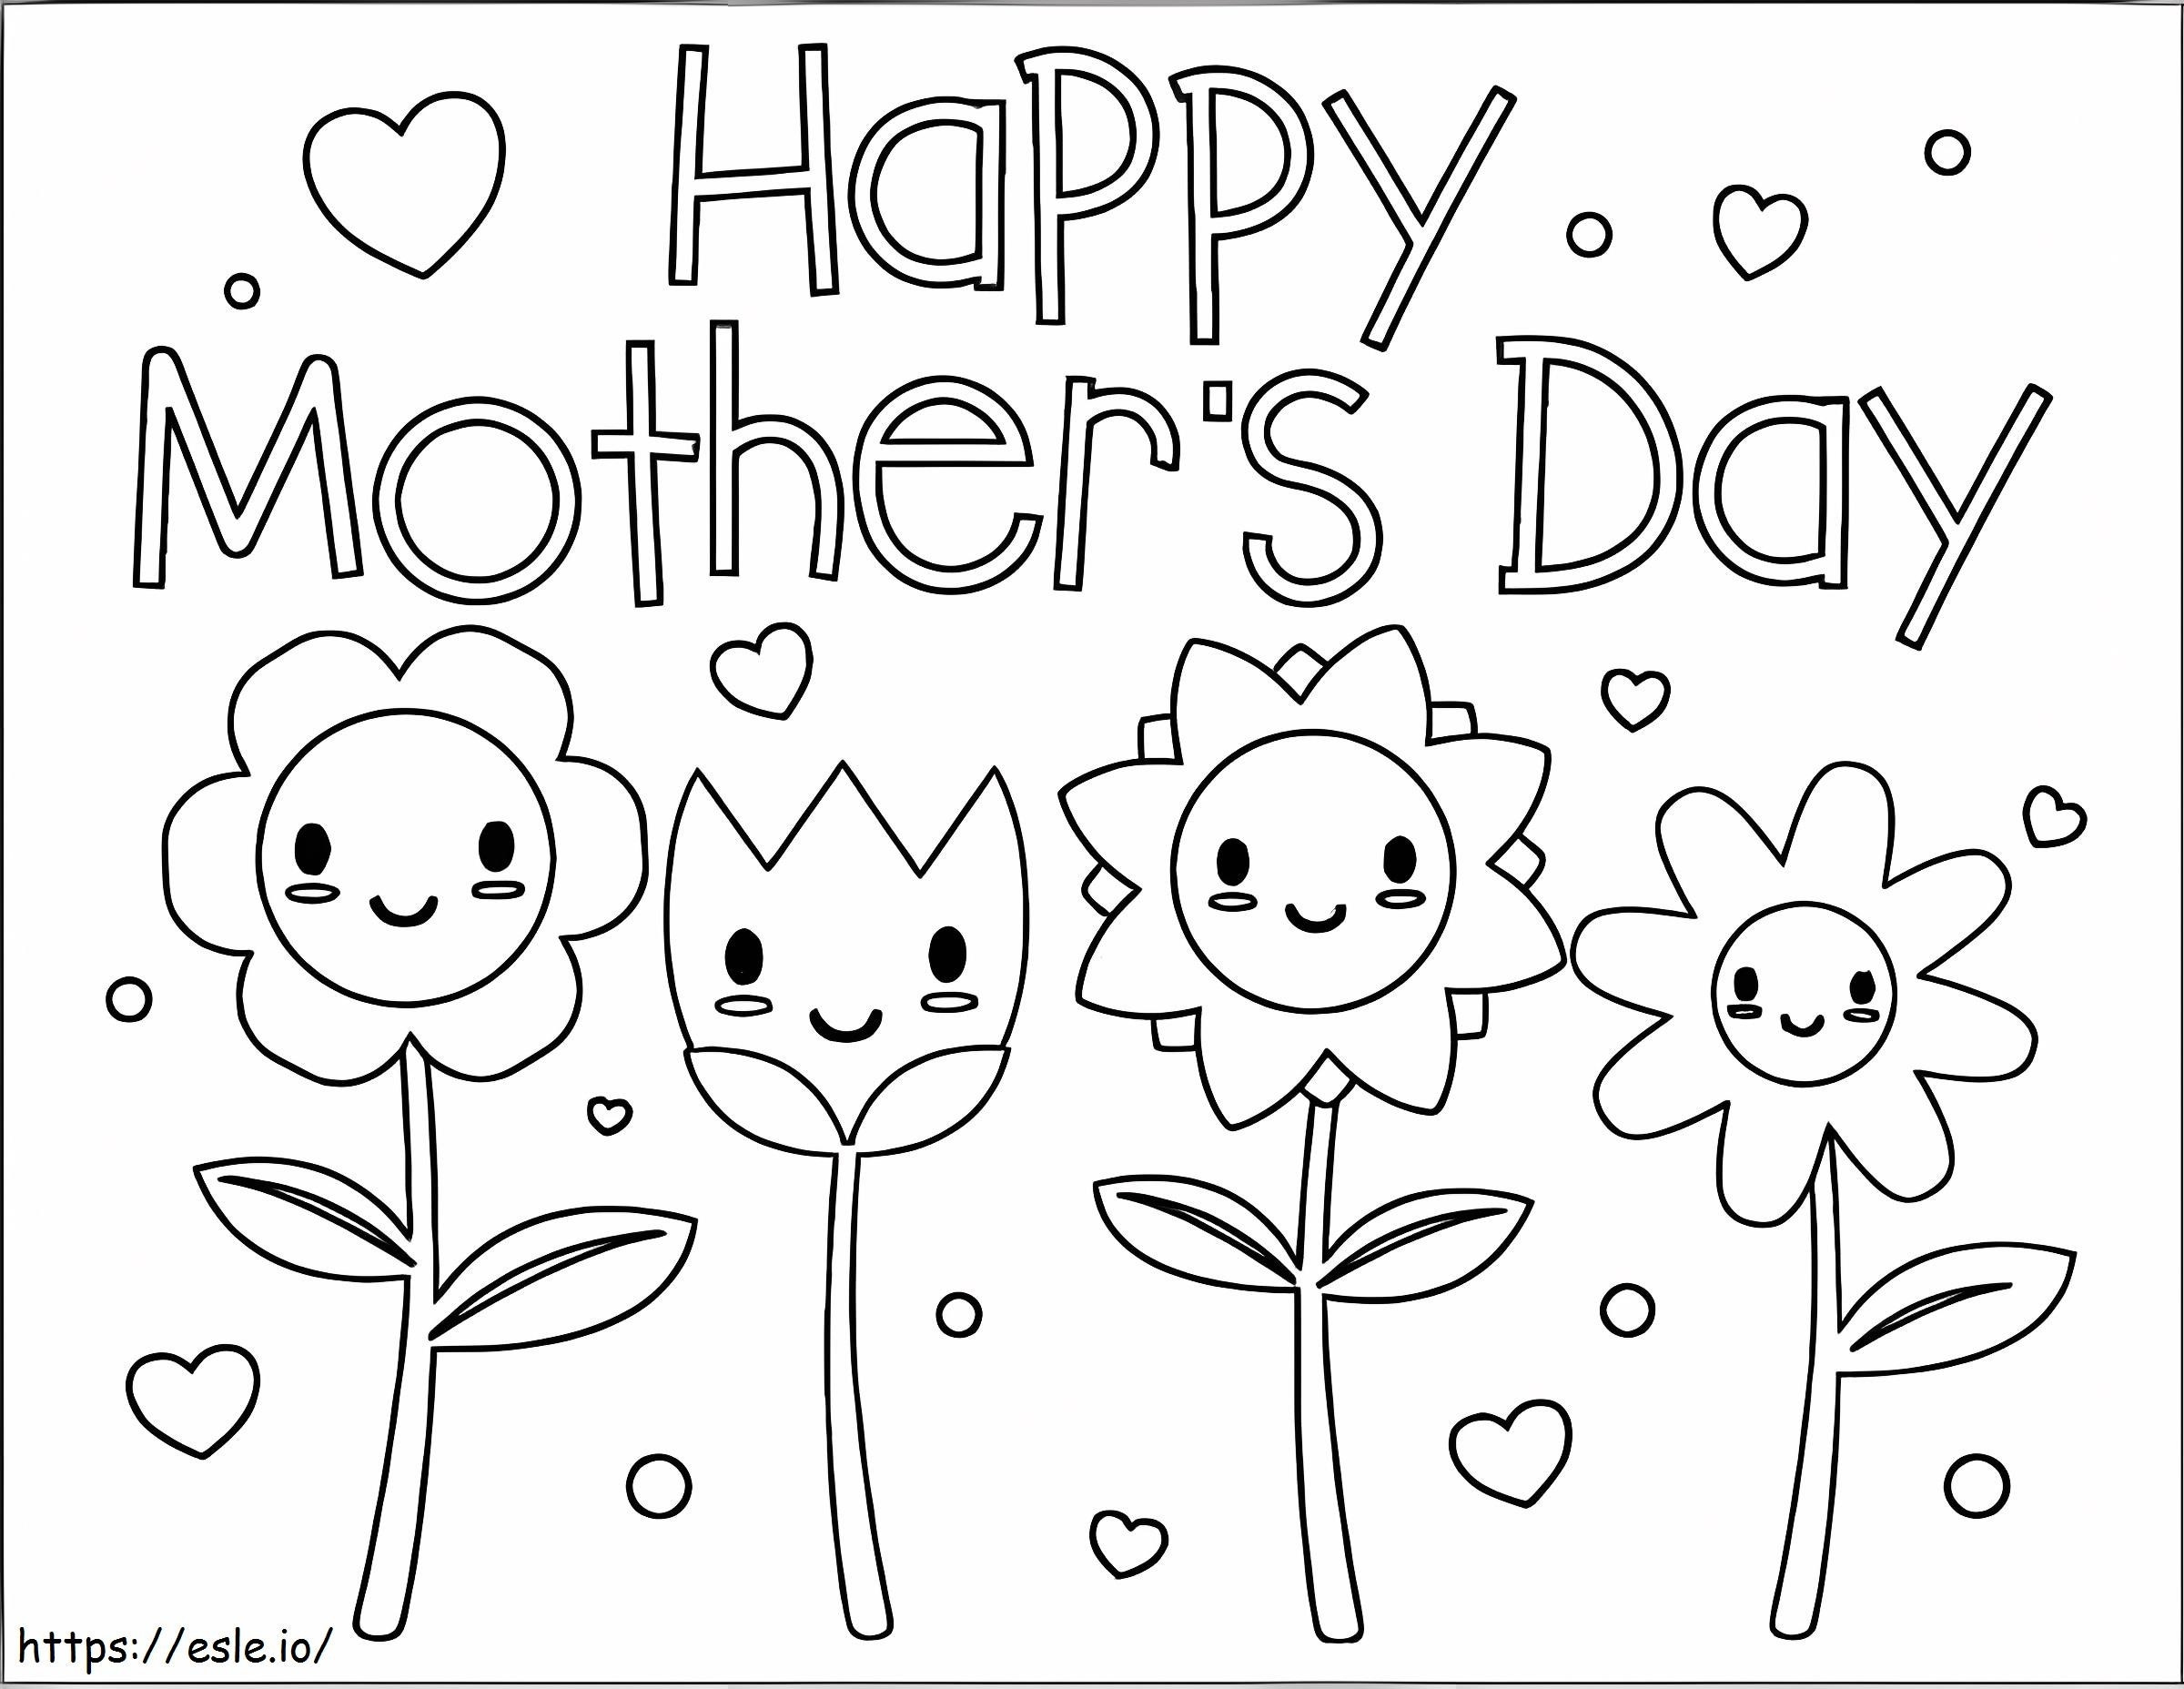 Happy Mothers Day 16 coloring page